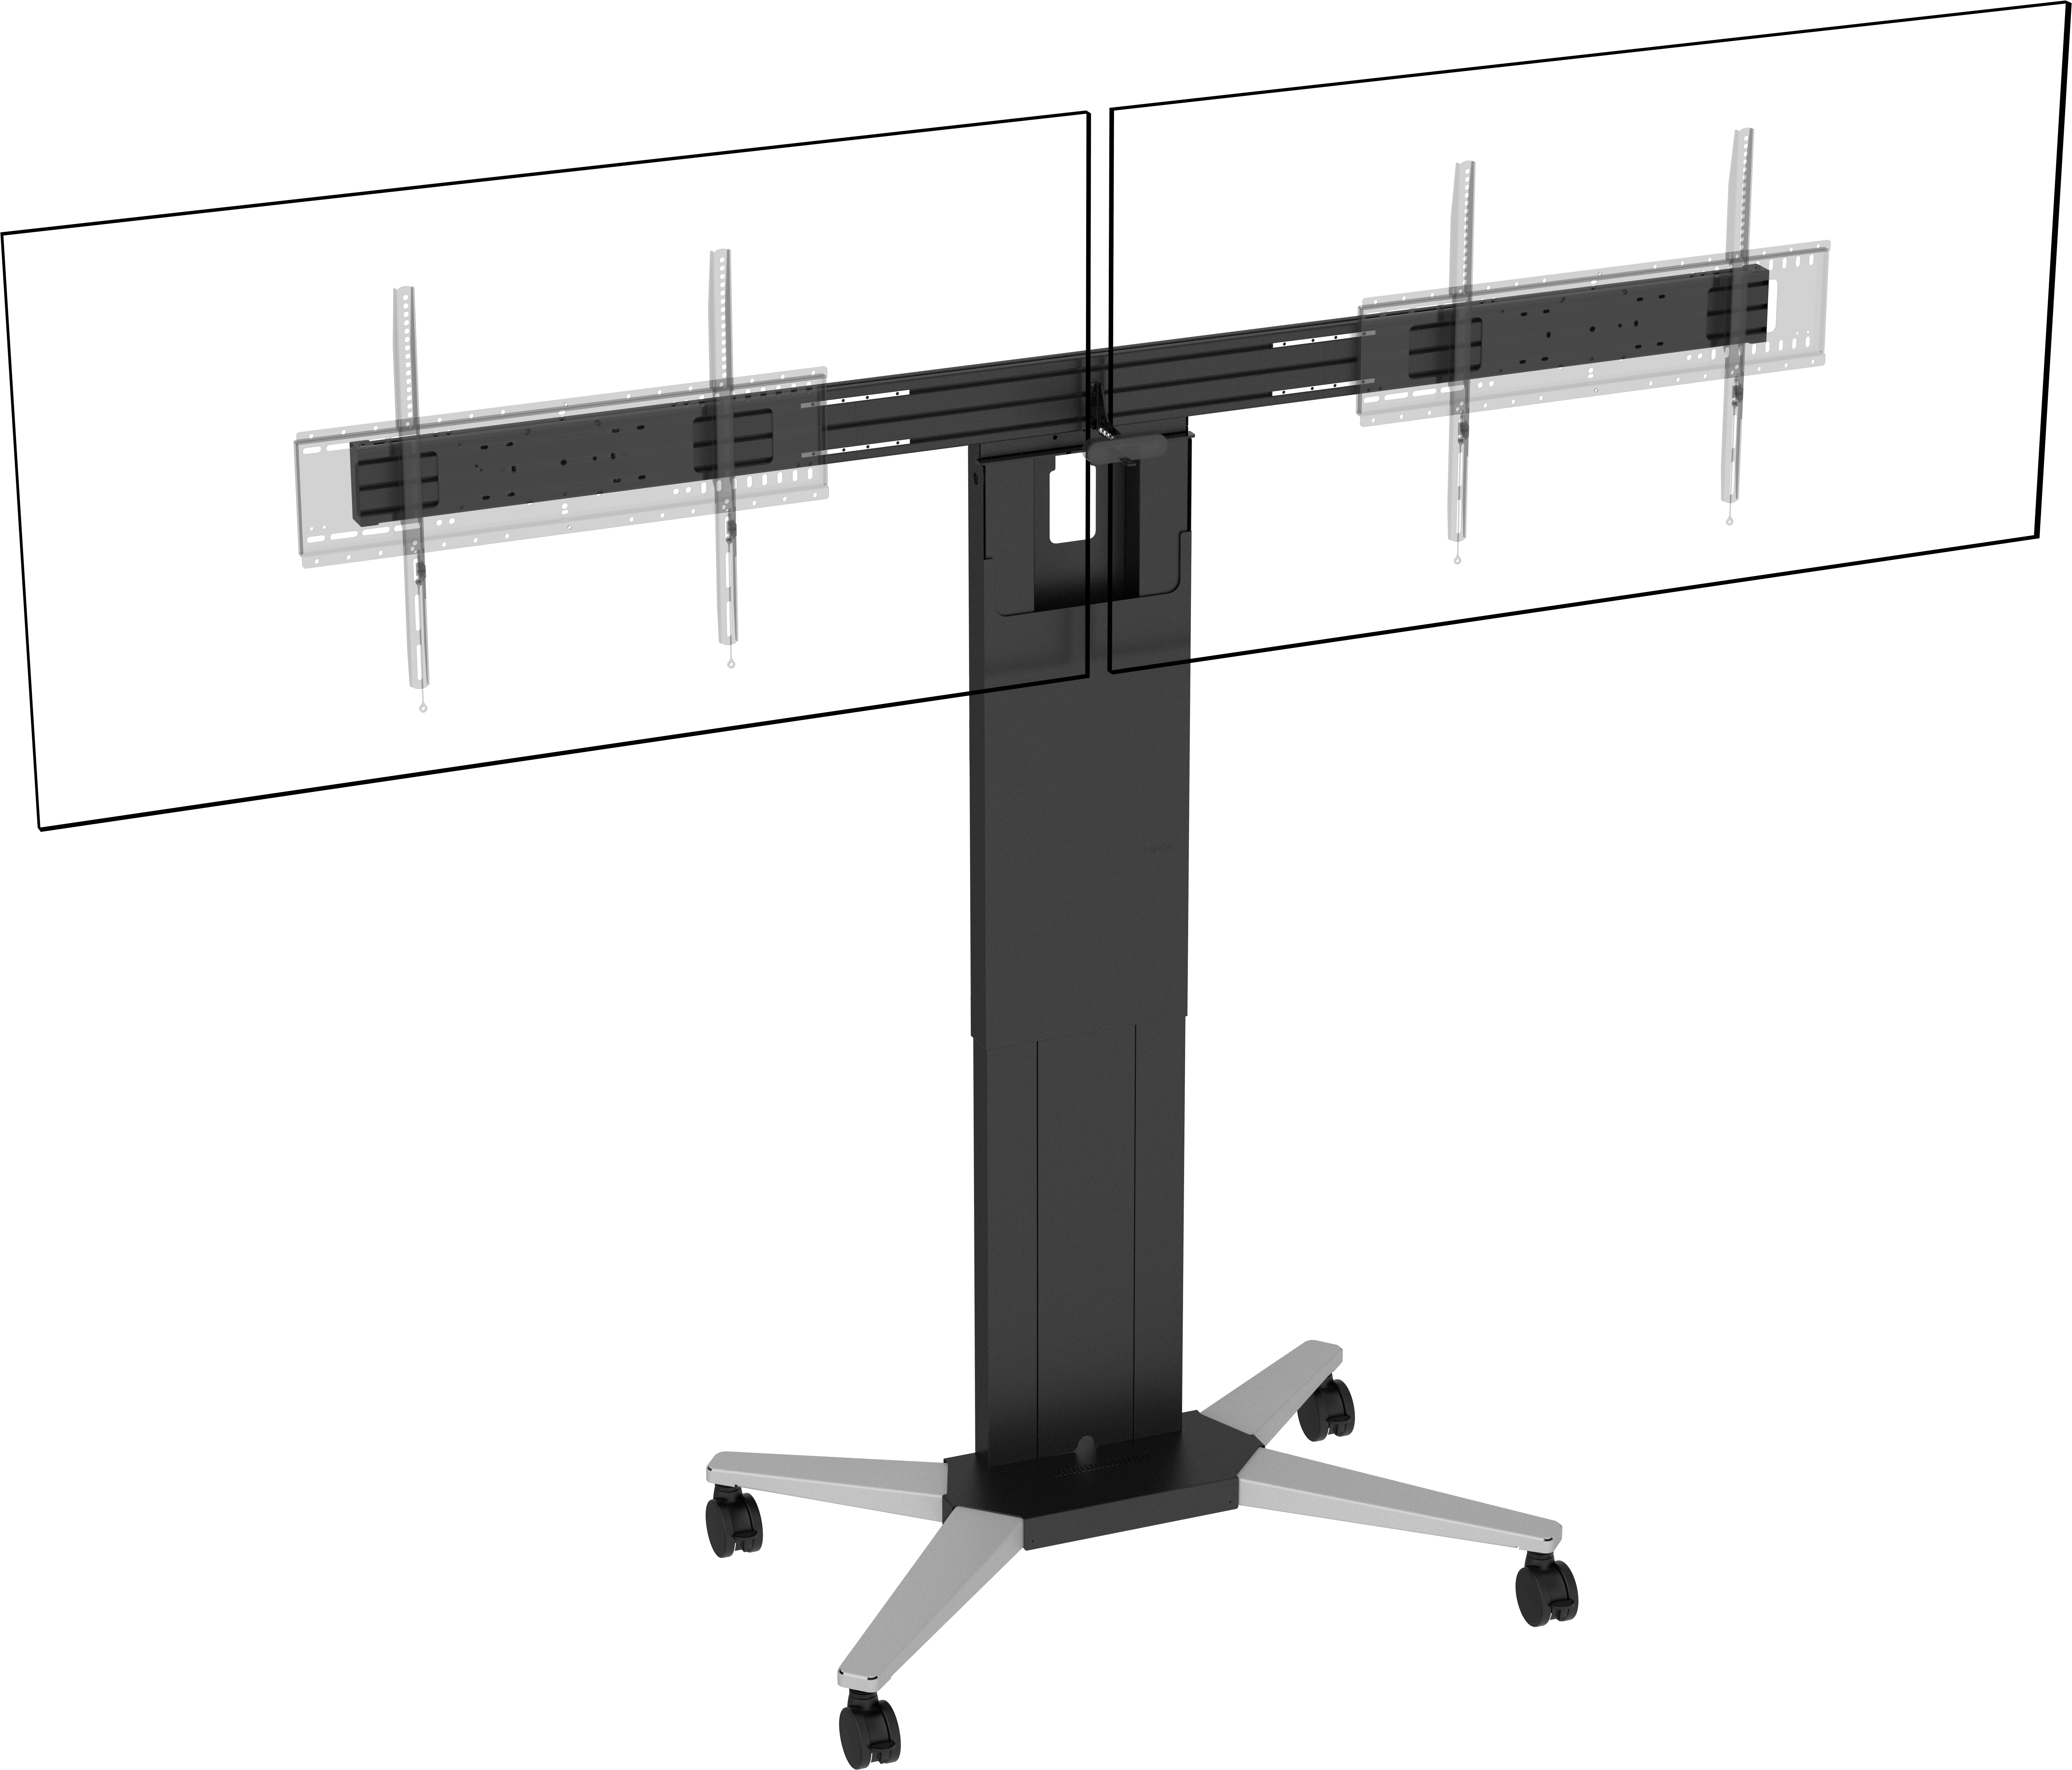 An image showing Dual Flat Panel Floor Stand